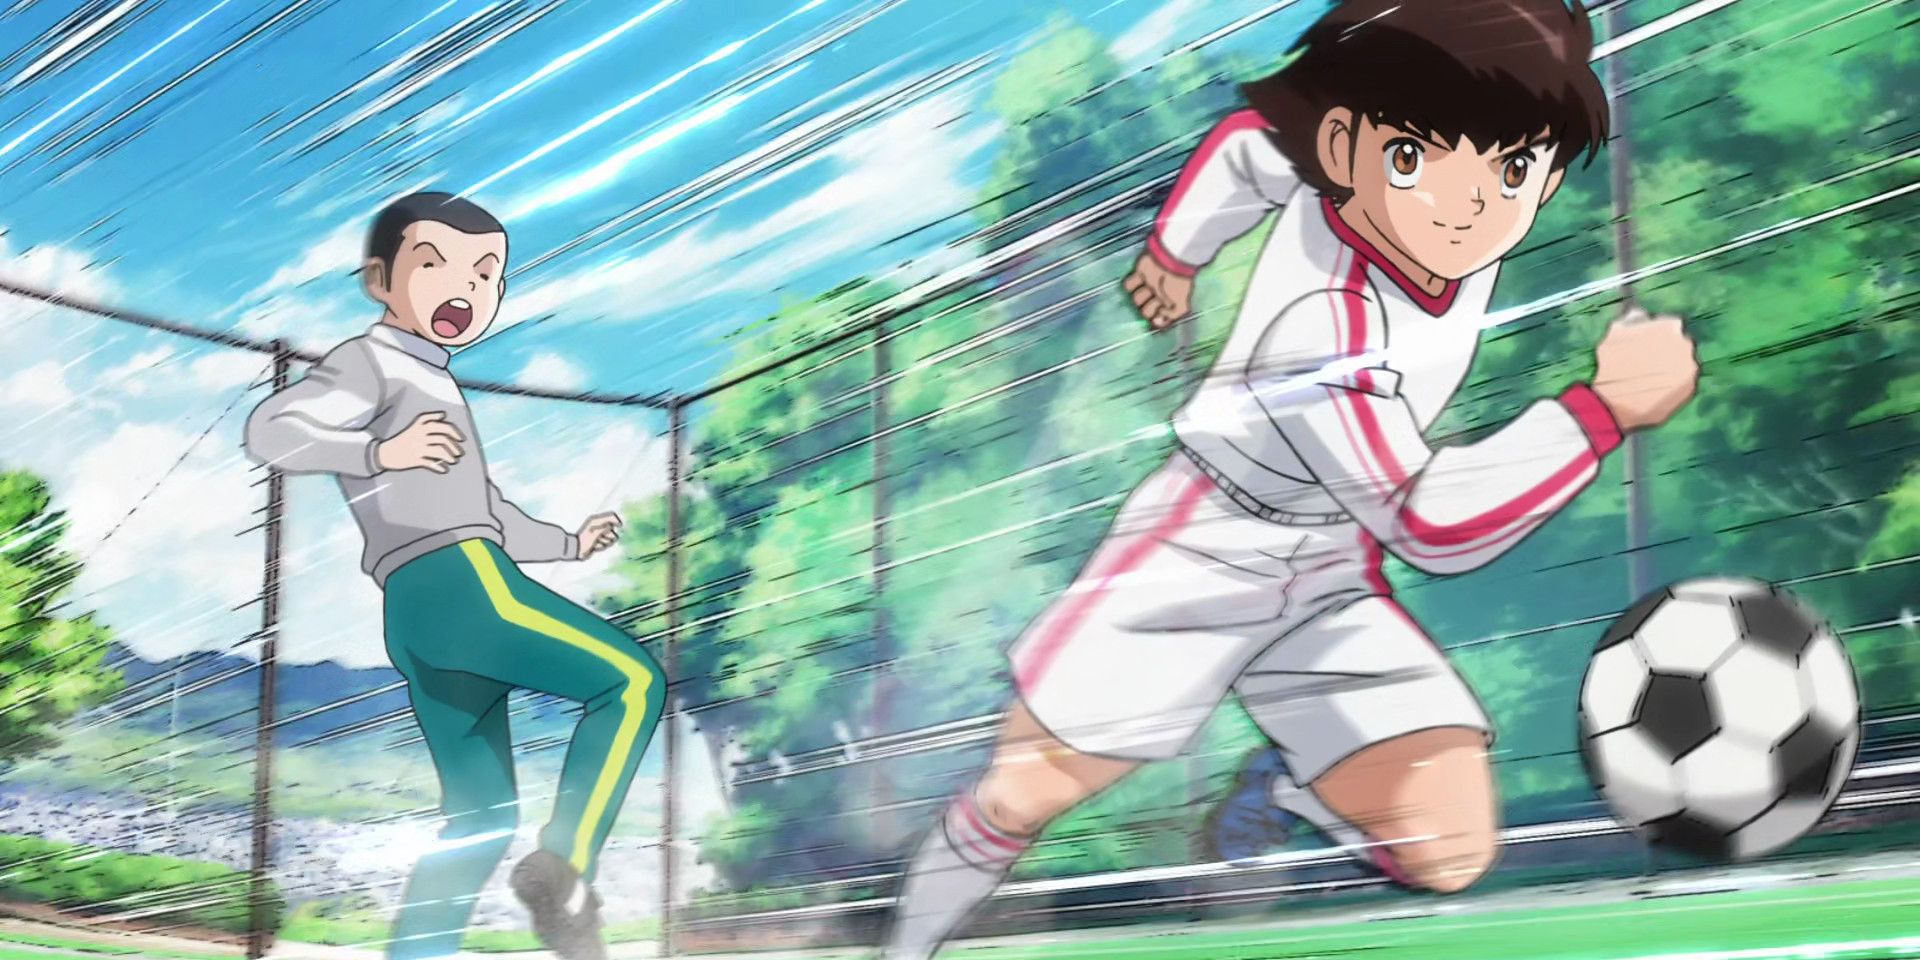 Rushing past the competition in 2018's Captain Tsubasa